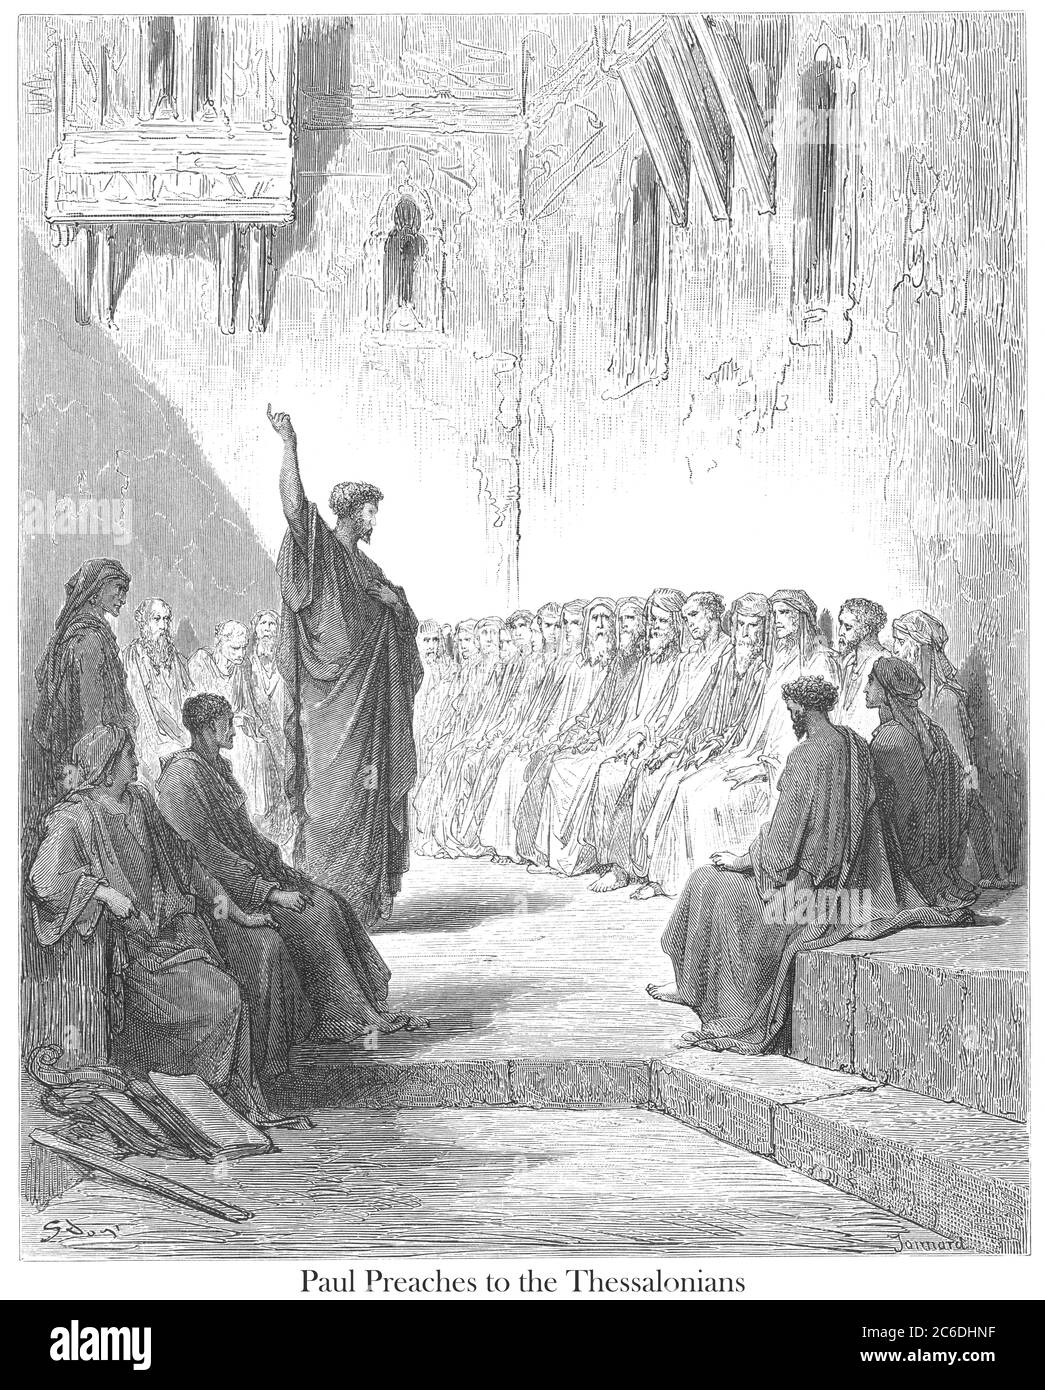 St. Paul Preaching to the Thessalonians [1 Thessalonians 2:11-12] From the book 'Bible Gallery' Illustrated by Gustave Dore with Memoir of Dore and Descriptive Letter-press by Talbot W. Chambers D.D. Published by Cassell & Company Limited in London and simultaneously by Mame in Tours, France in 1866 Stock Photo